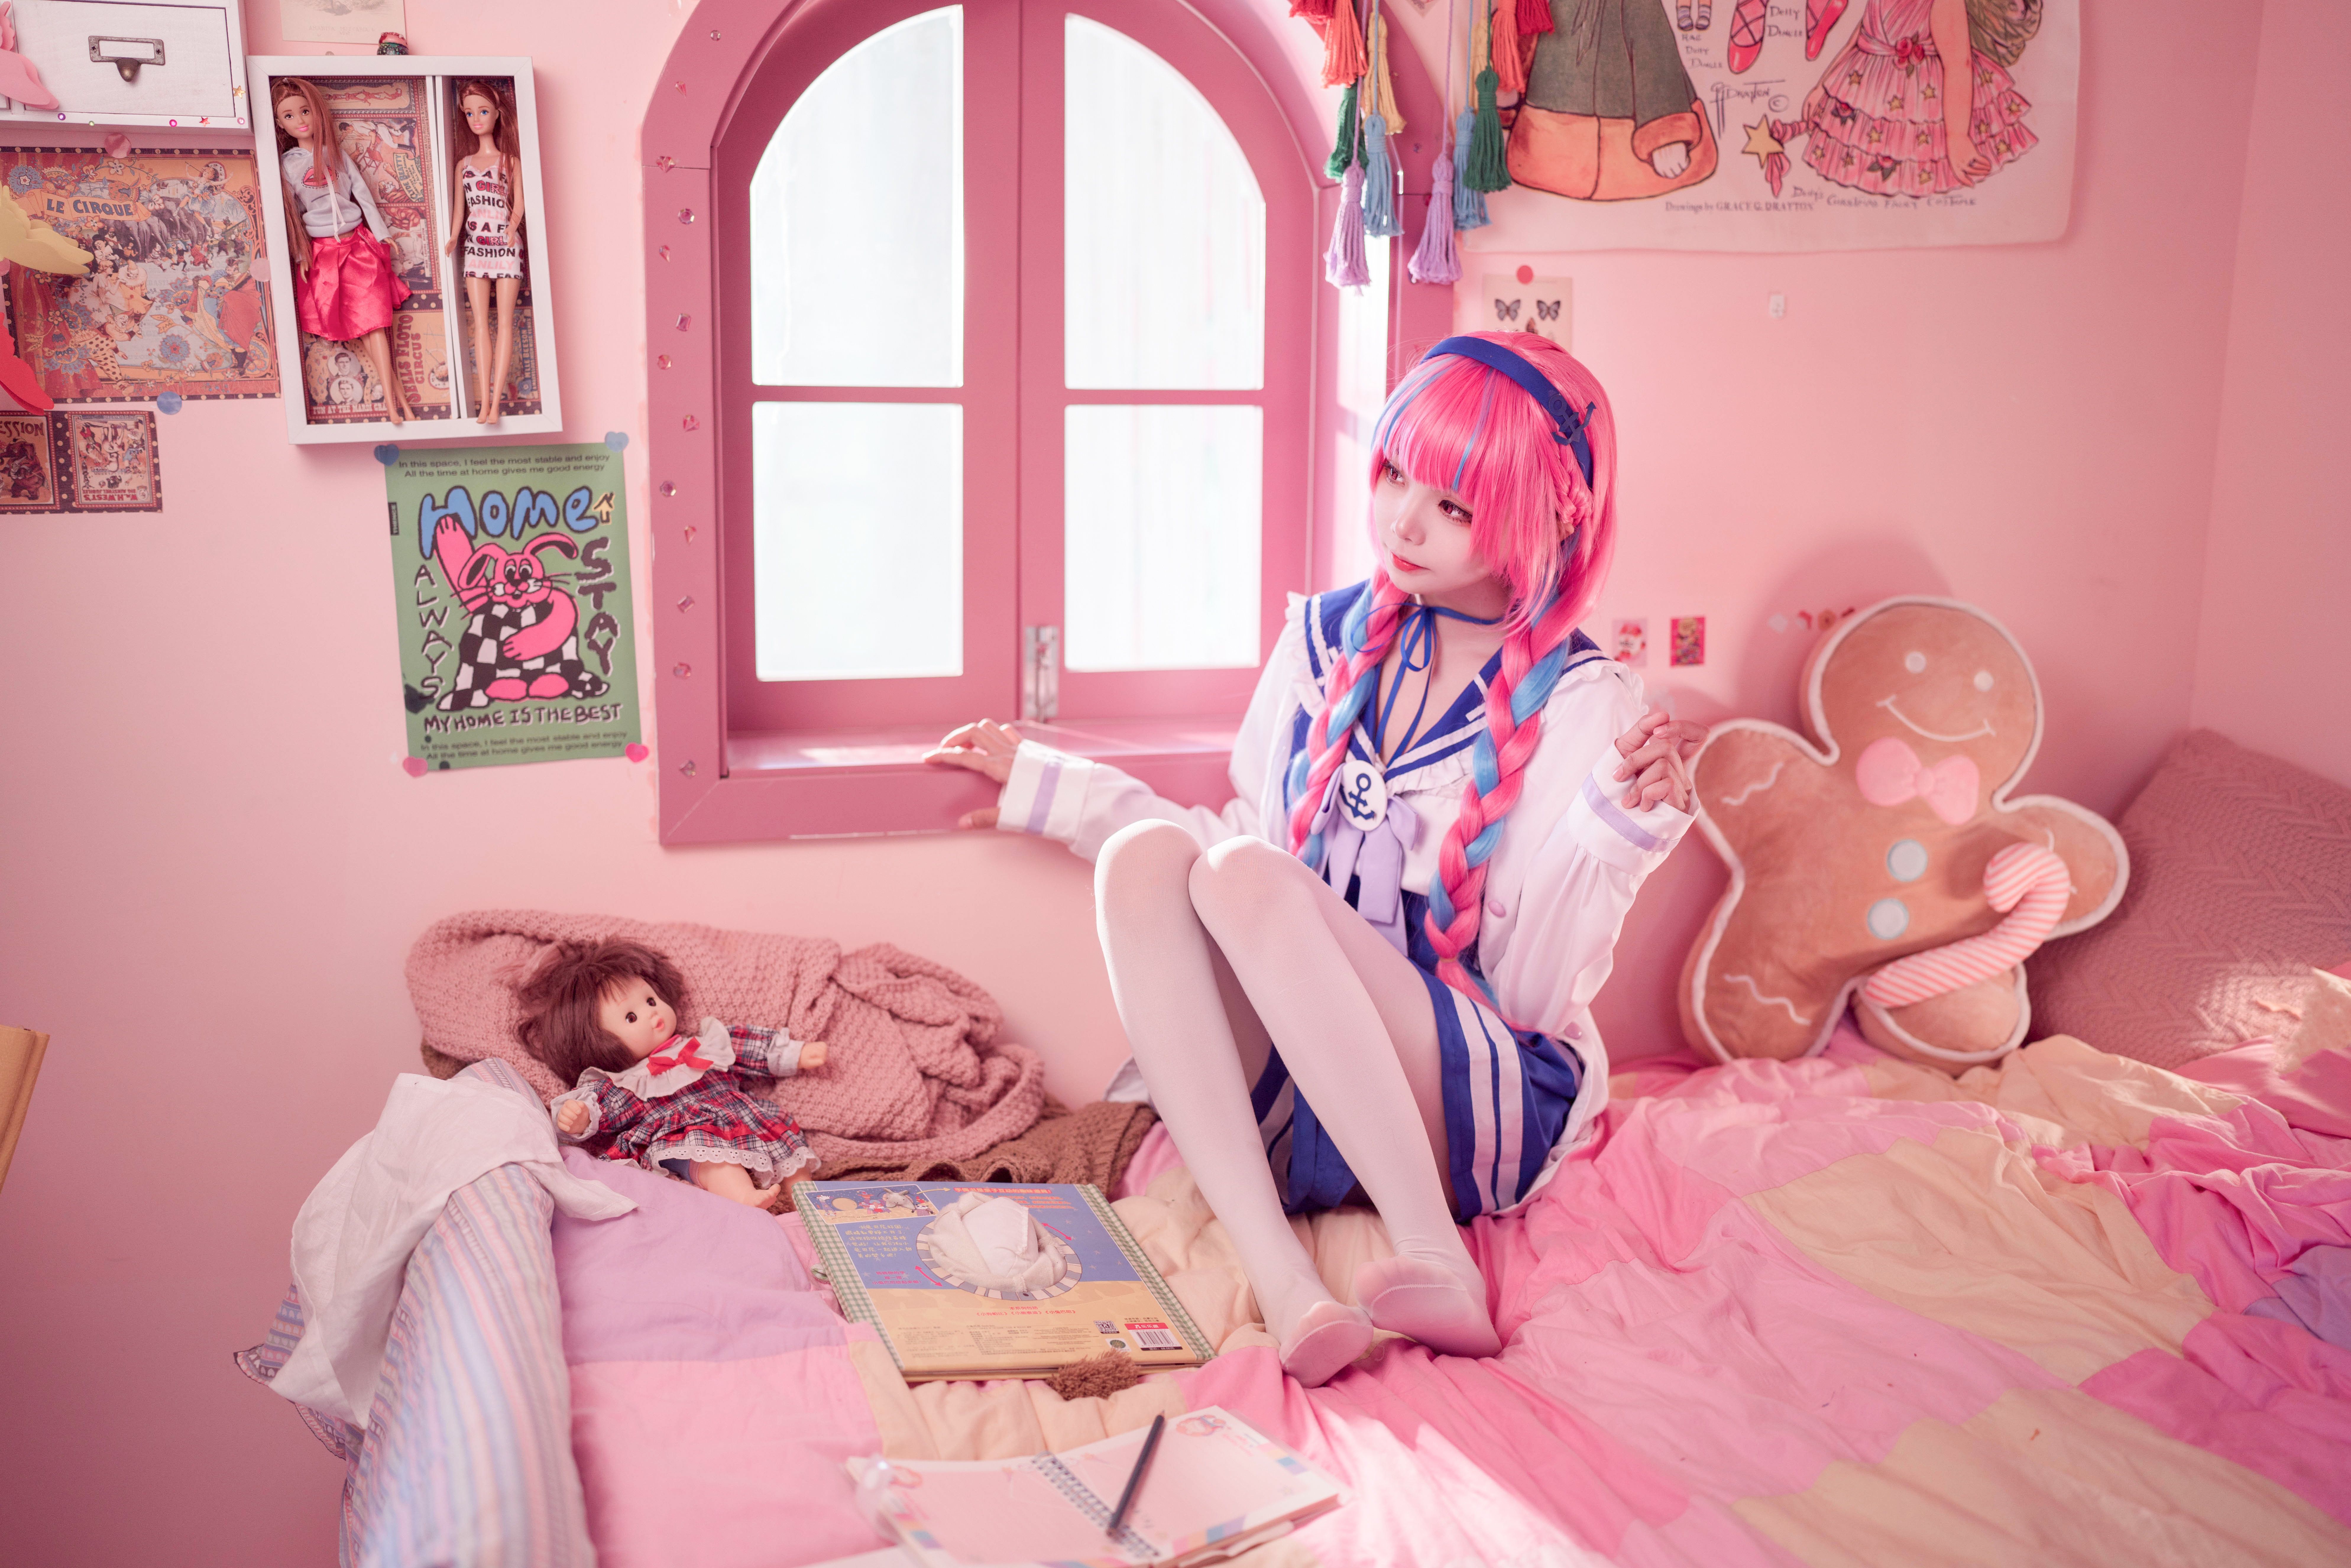 Minato Aqua Pink Hair Asian Cosplay Legs Maid Outfit Feet Looking Away Indoors In Bed 7952x5304